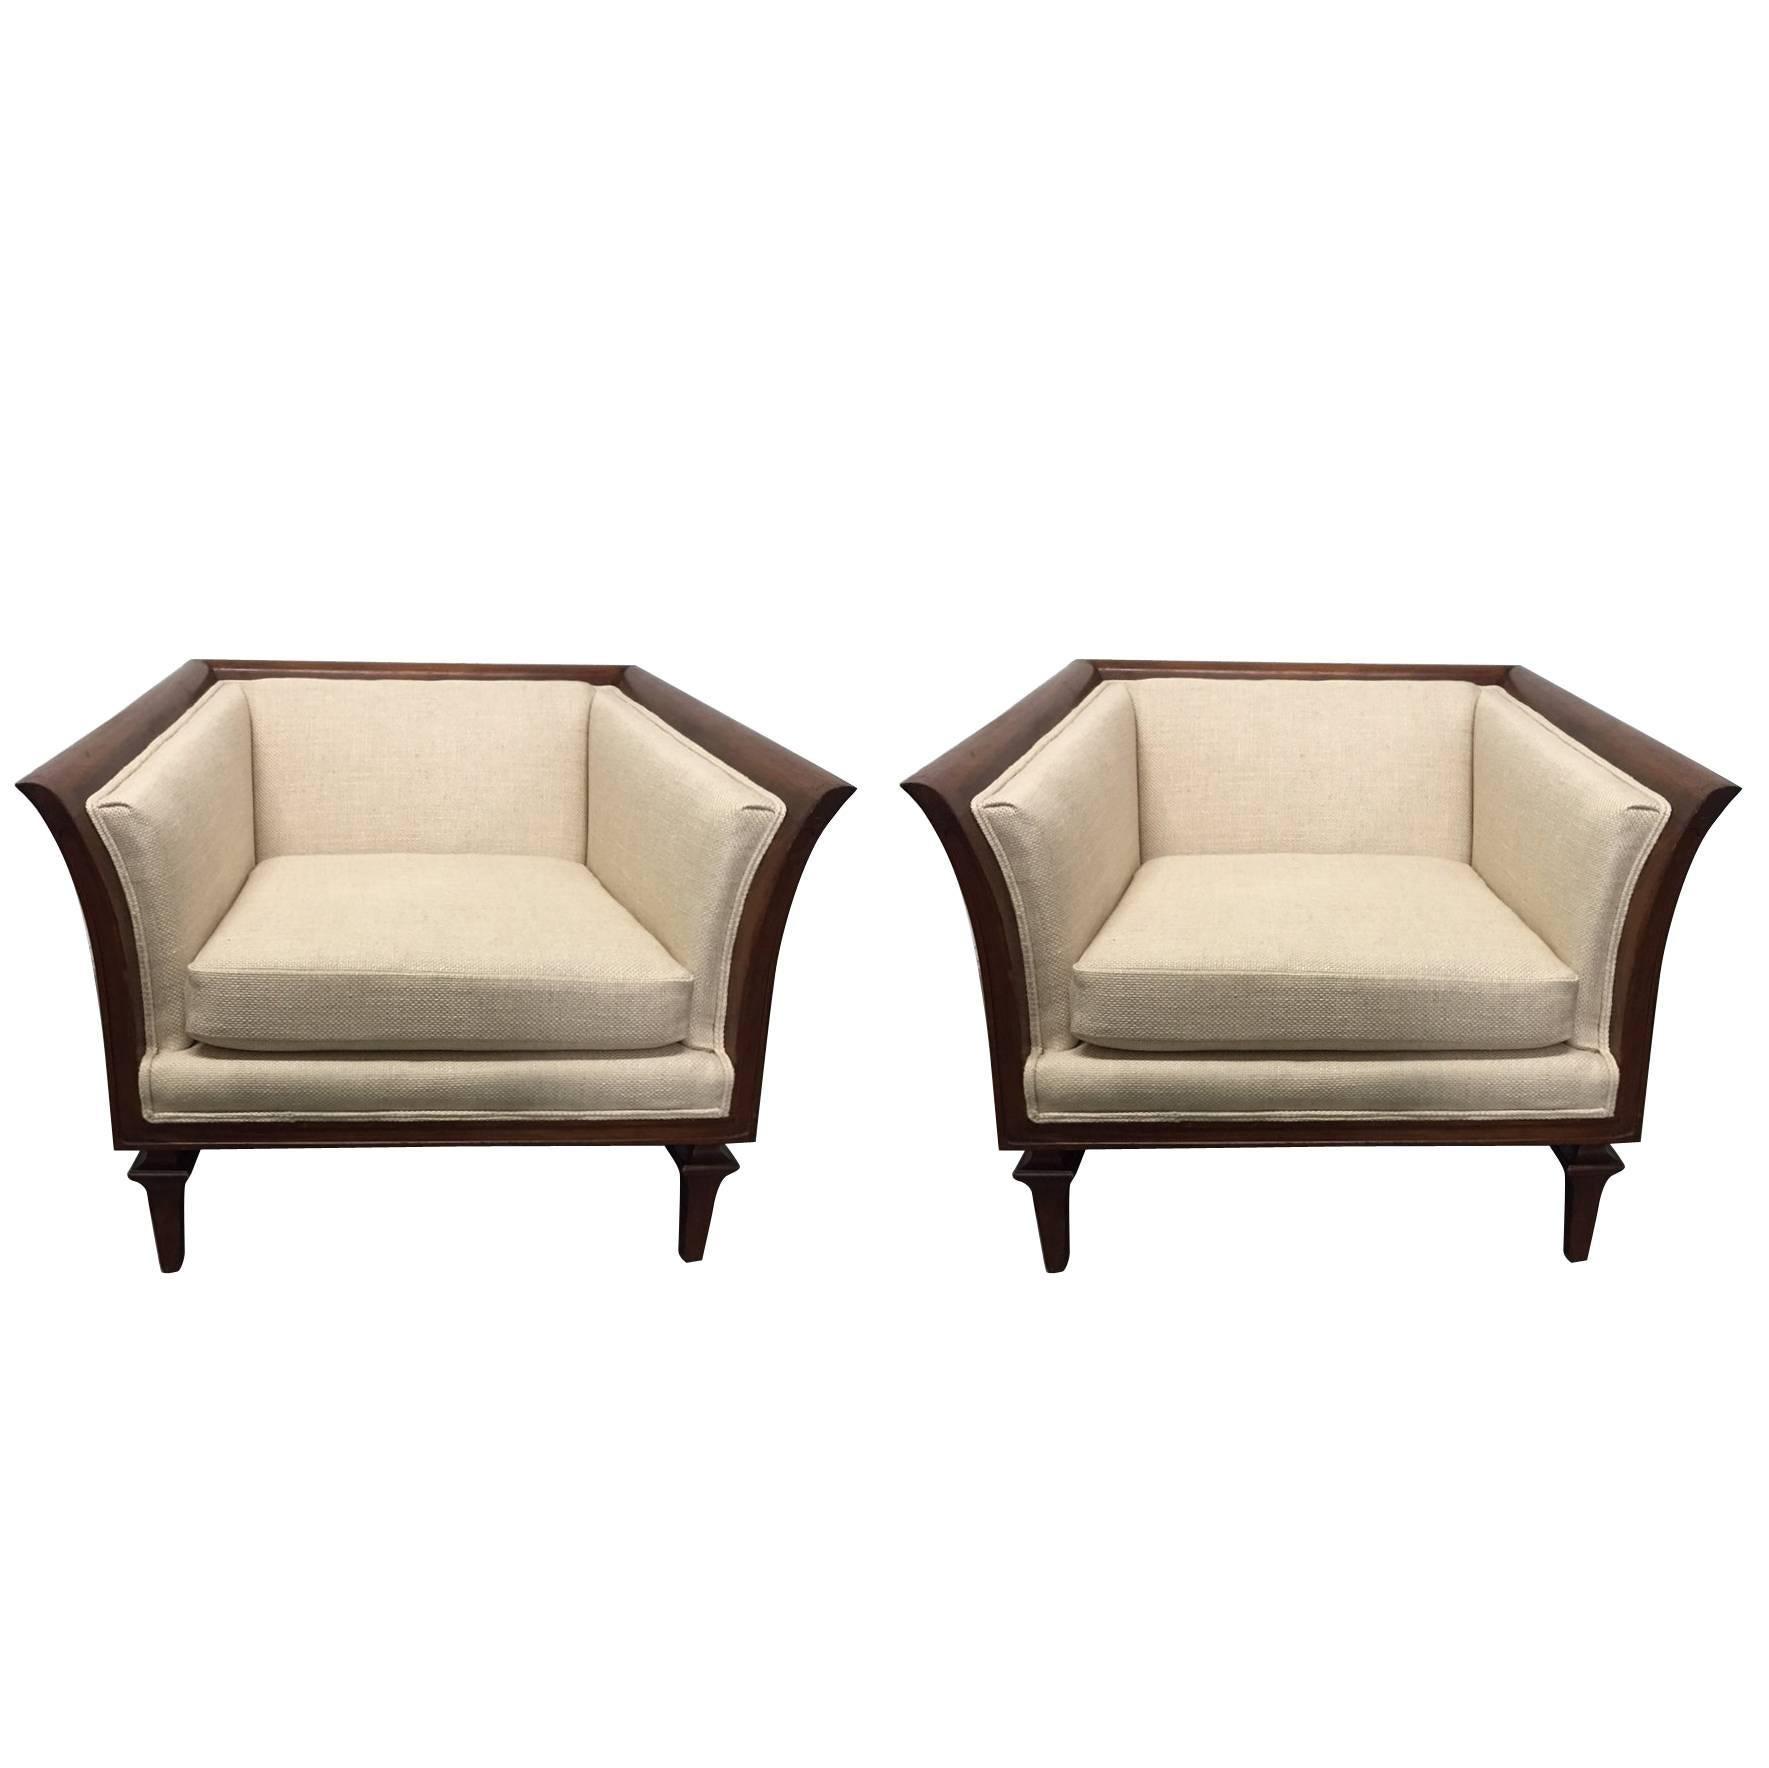 Pair of Sculptural Walnut Lounge Chairs